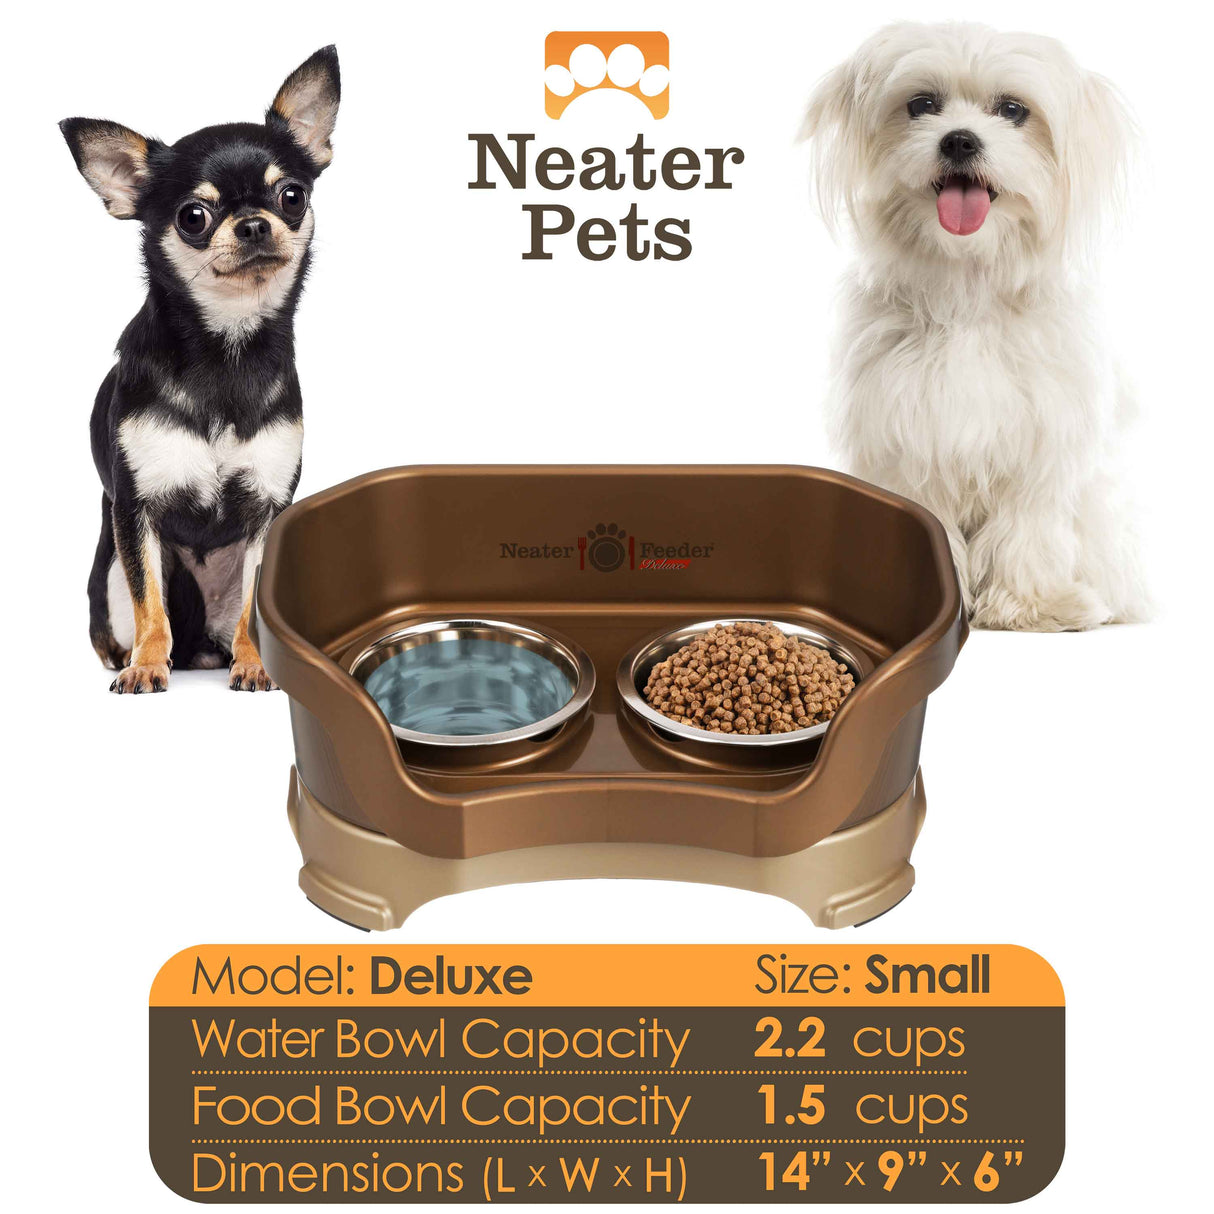 Deluxe small bowl capacity and dimensions